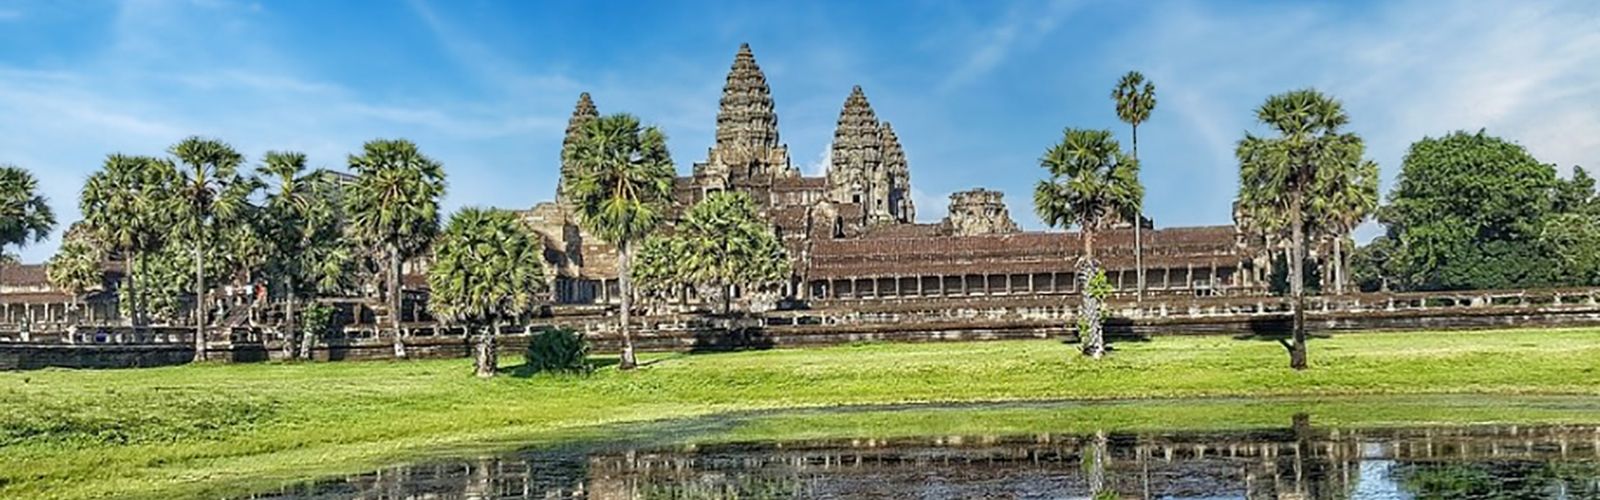 Cambodia Overview Tour